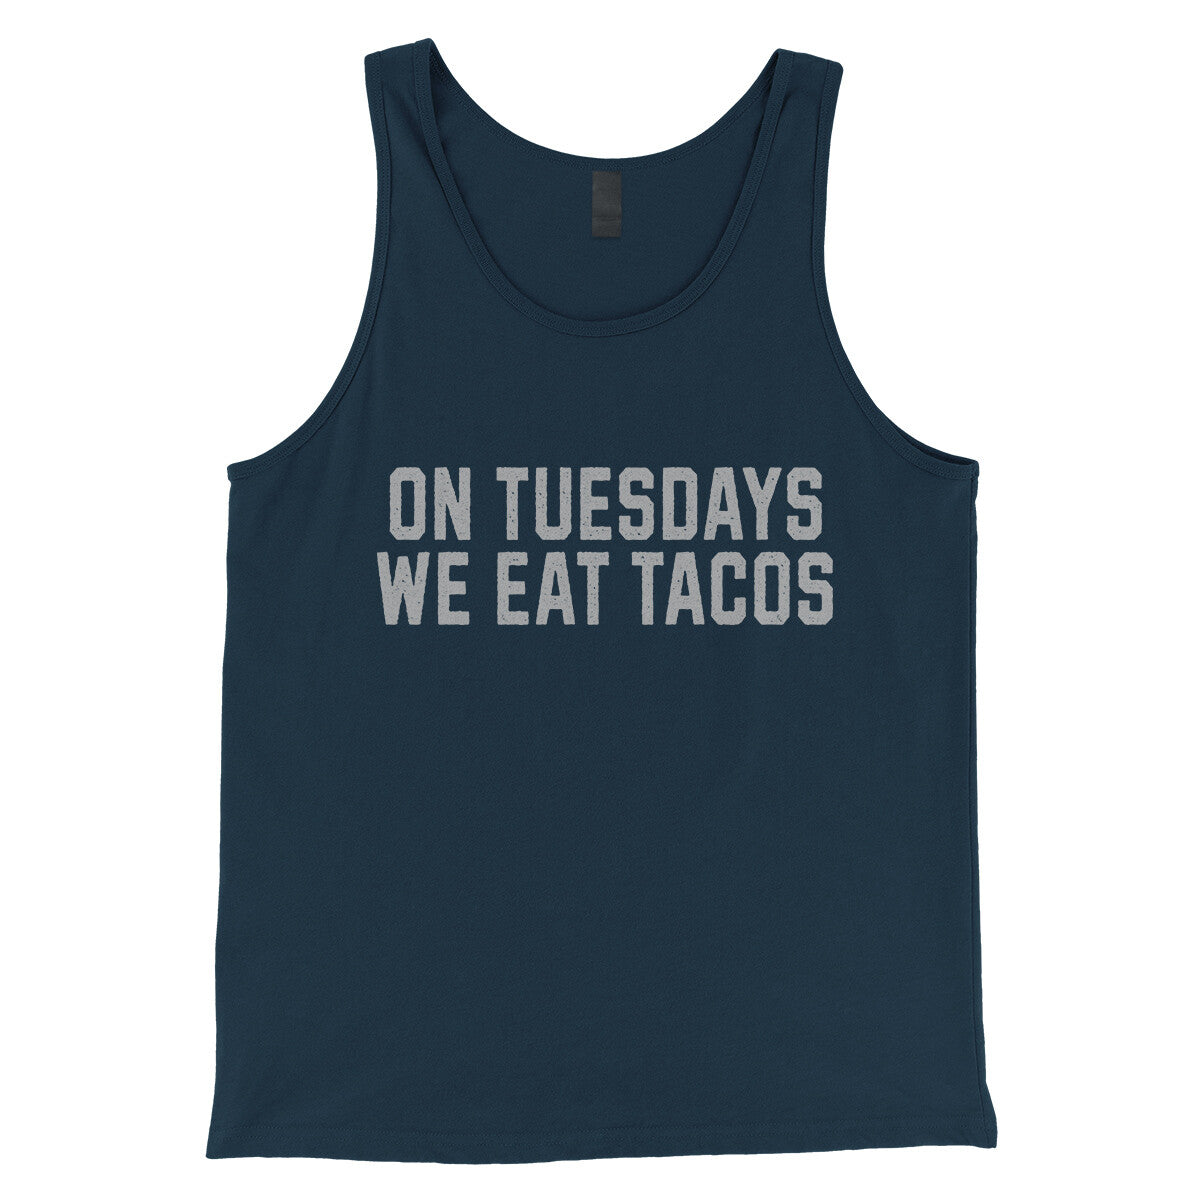 On Tuesdays We Eat Tacos in Navy Color